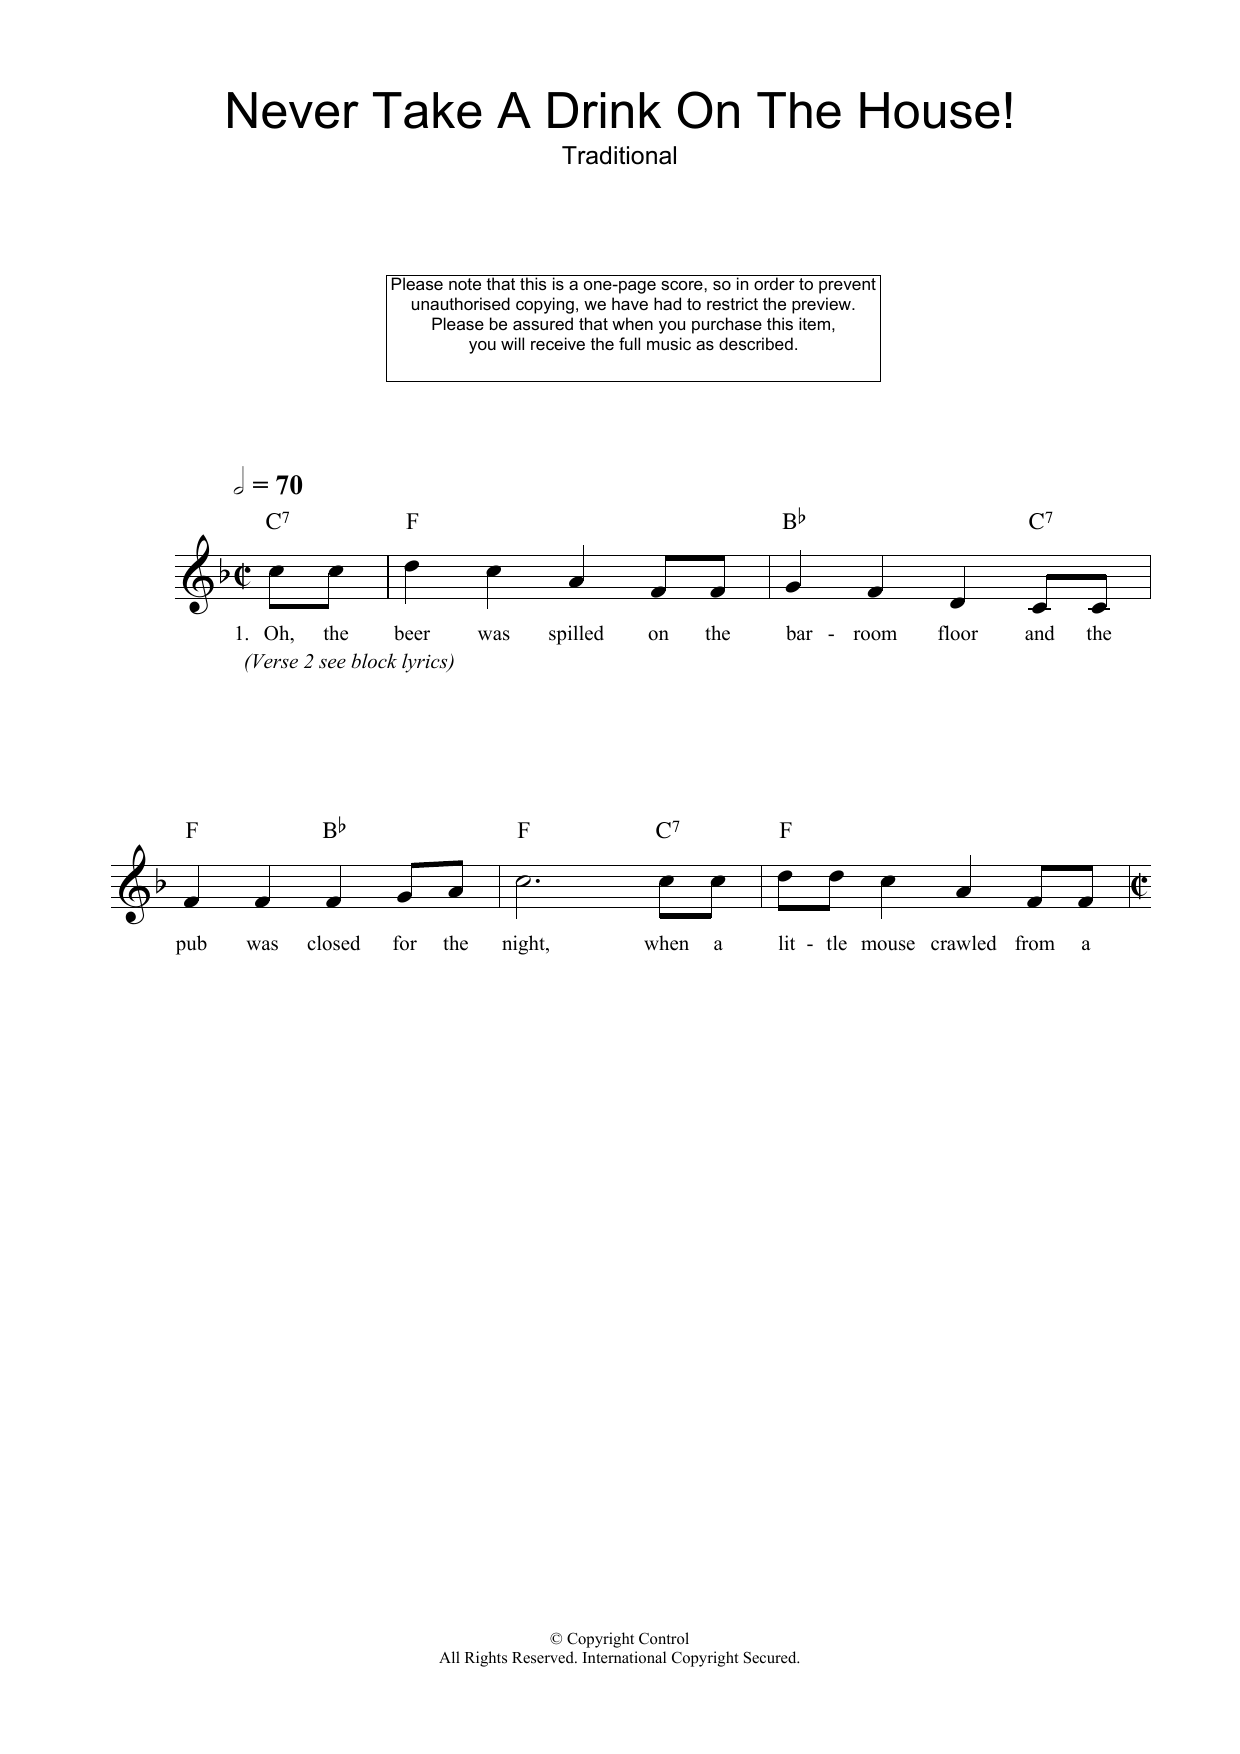 Download Traditional Never Take A Drink On The House! Sheet Music